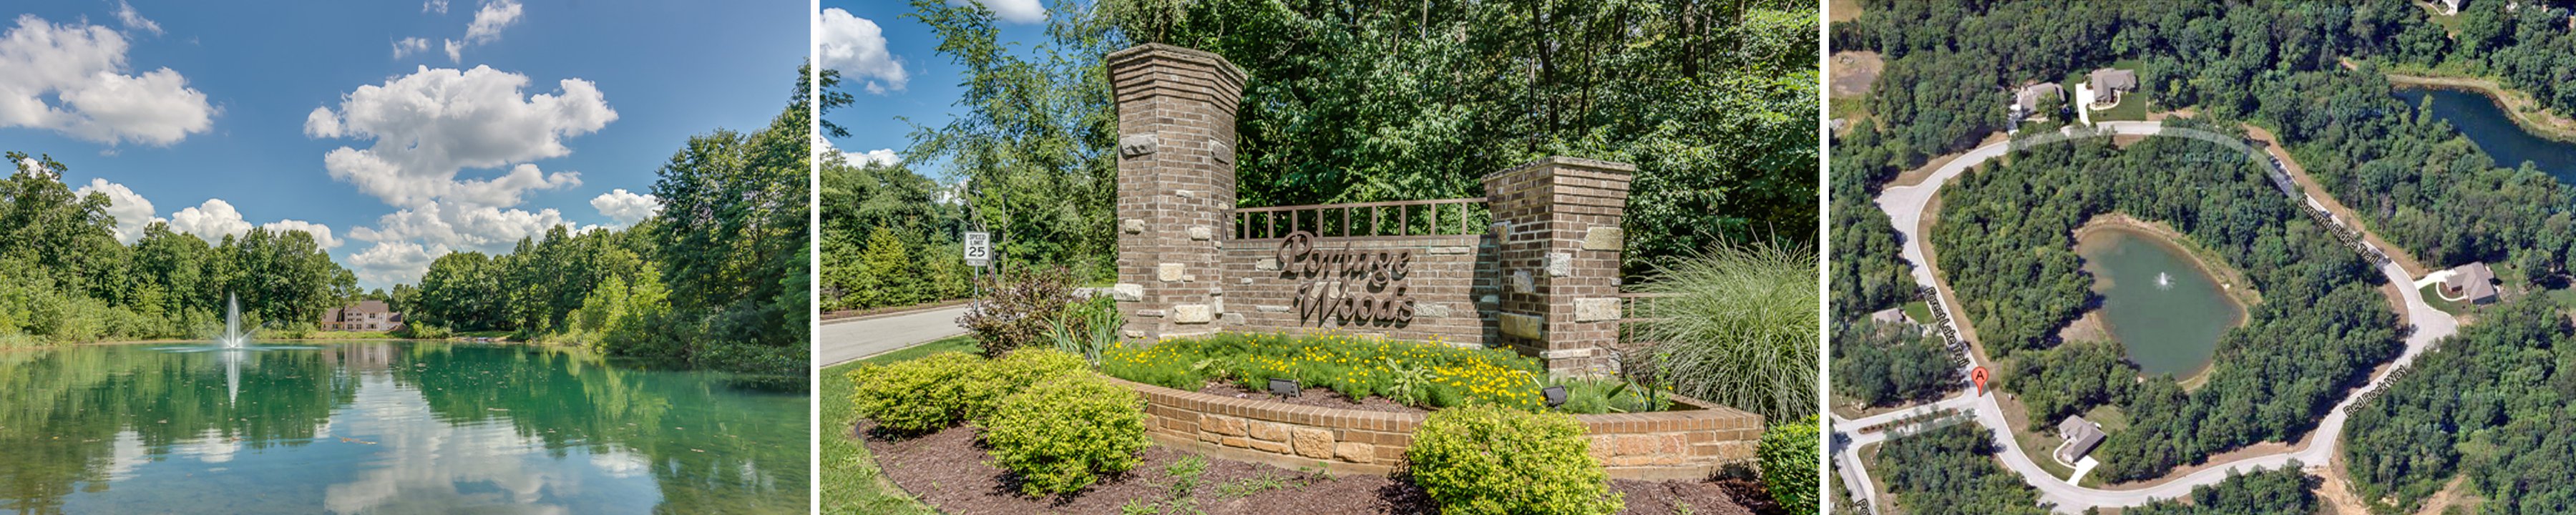 Portage Woods-Lots Available for Sale